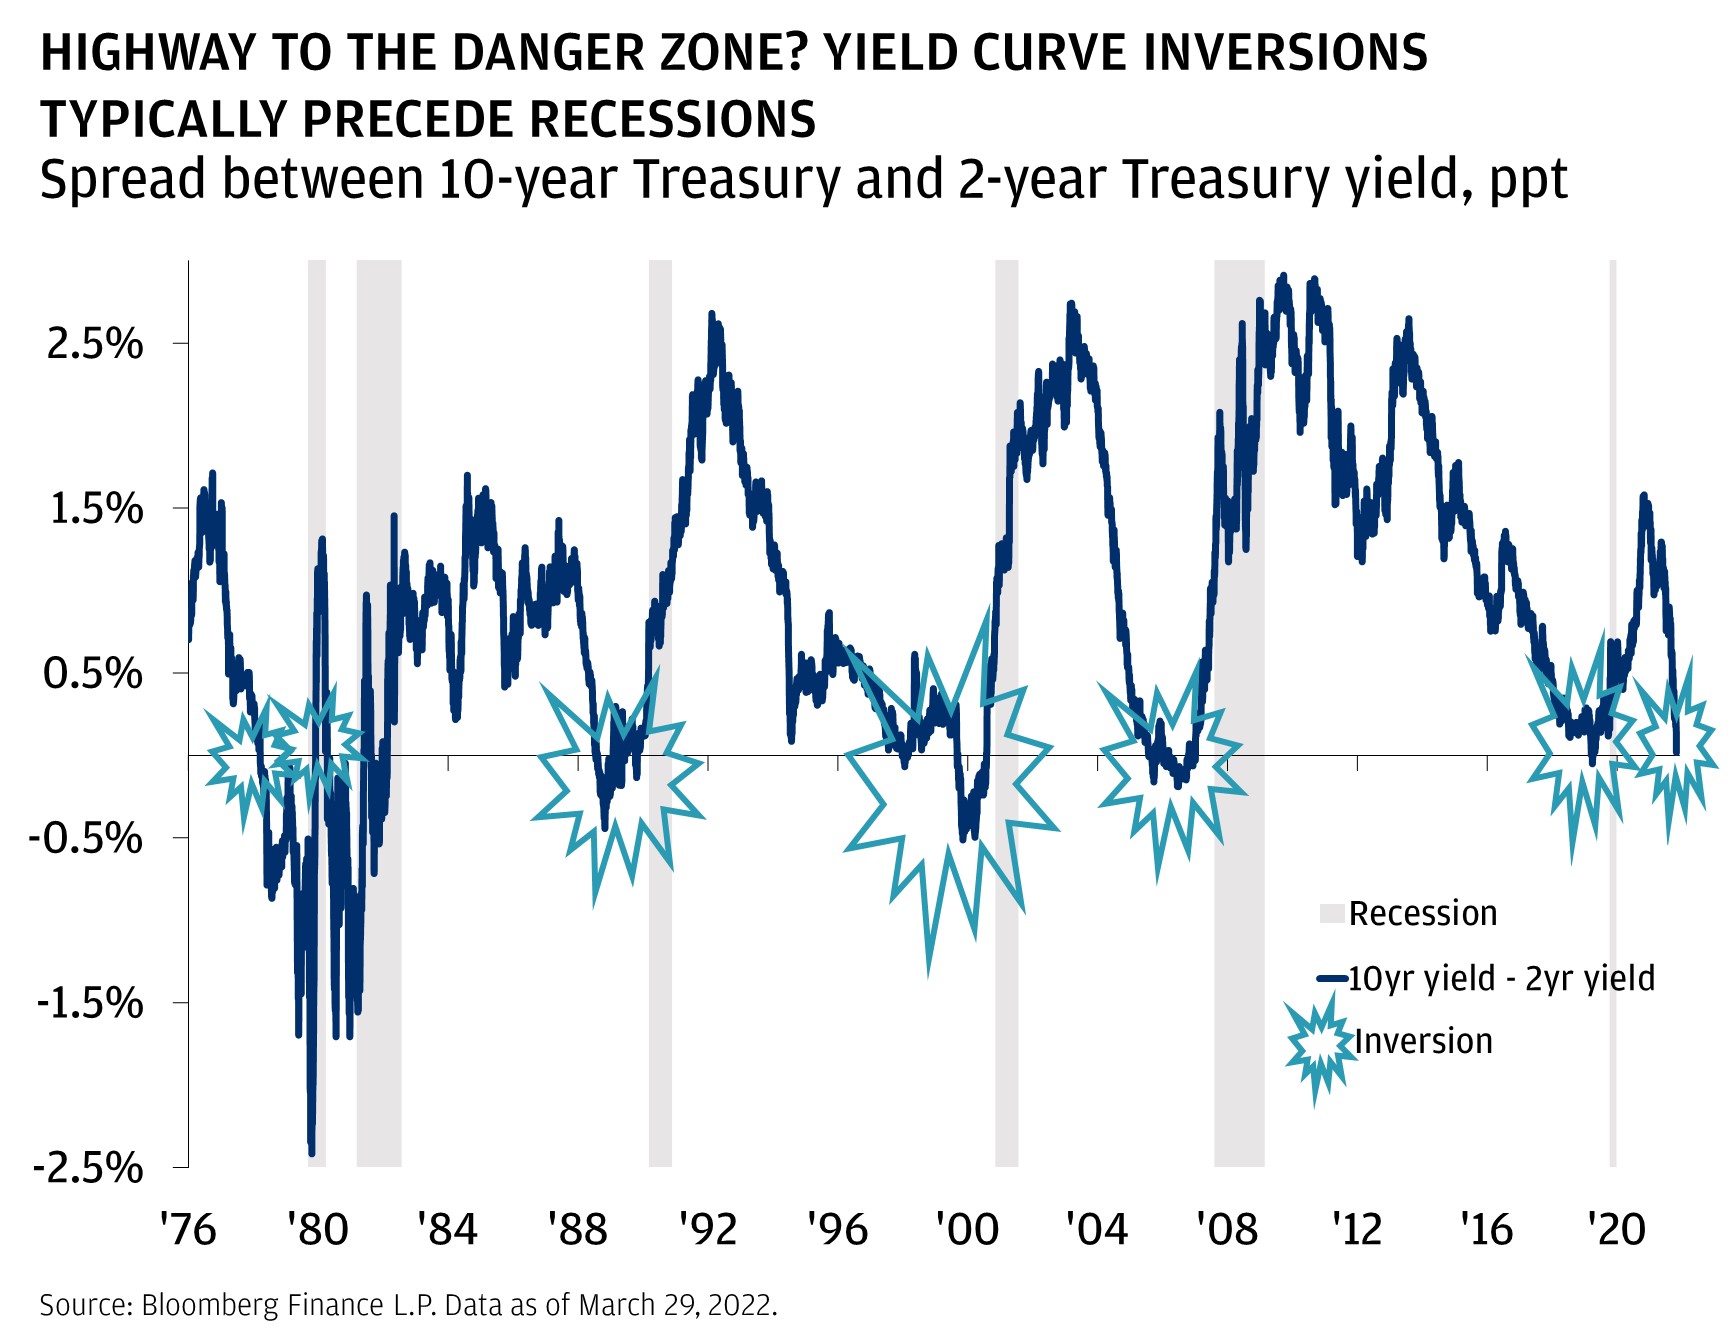 HIGHWAY TO THE DANGER ZONE? YIELD CURVE INVERSIONS PRECEDE RECESSIONS. This chart shows the spread between 10-year and 2-year Treasury yield and the recession bars, from June 3, 1976, to March 29, 2022. 